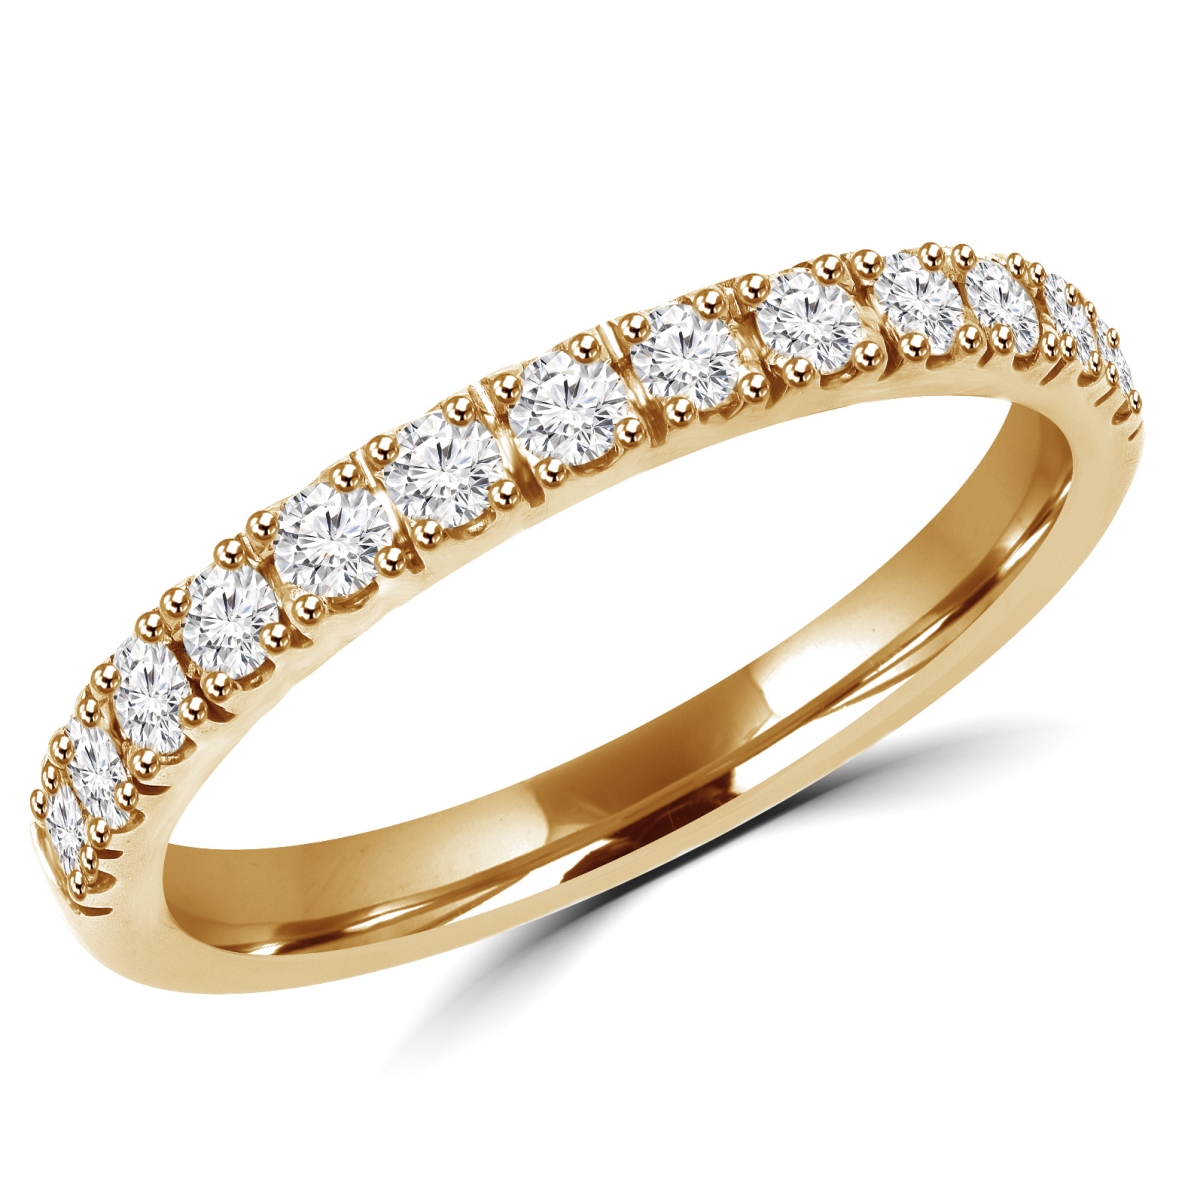 Picture of Majesty Diamonds MD180187-8.5 0.3 CTW Round Diamond Semi-Eternity Wedding Band Ring in 14K Yellow Gold - Size 8.5